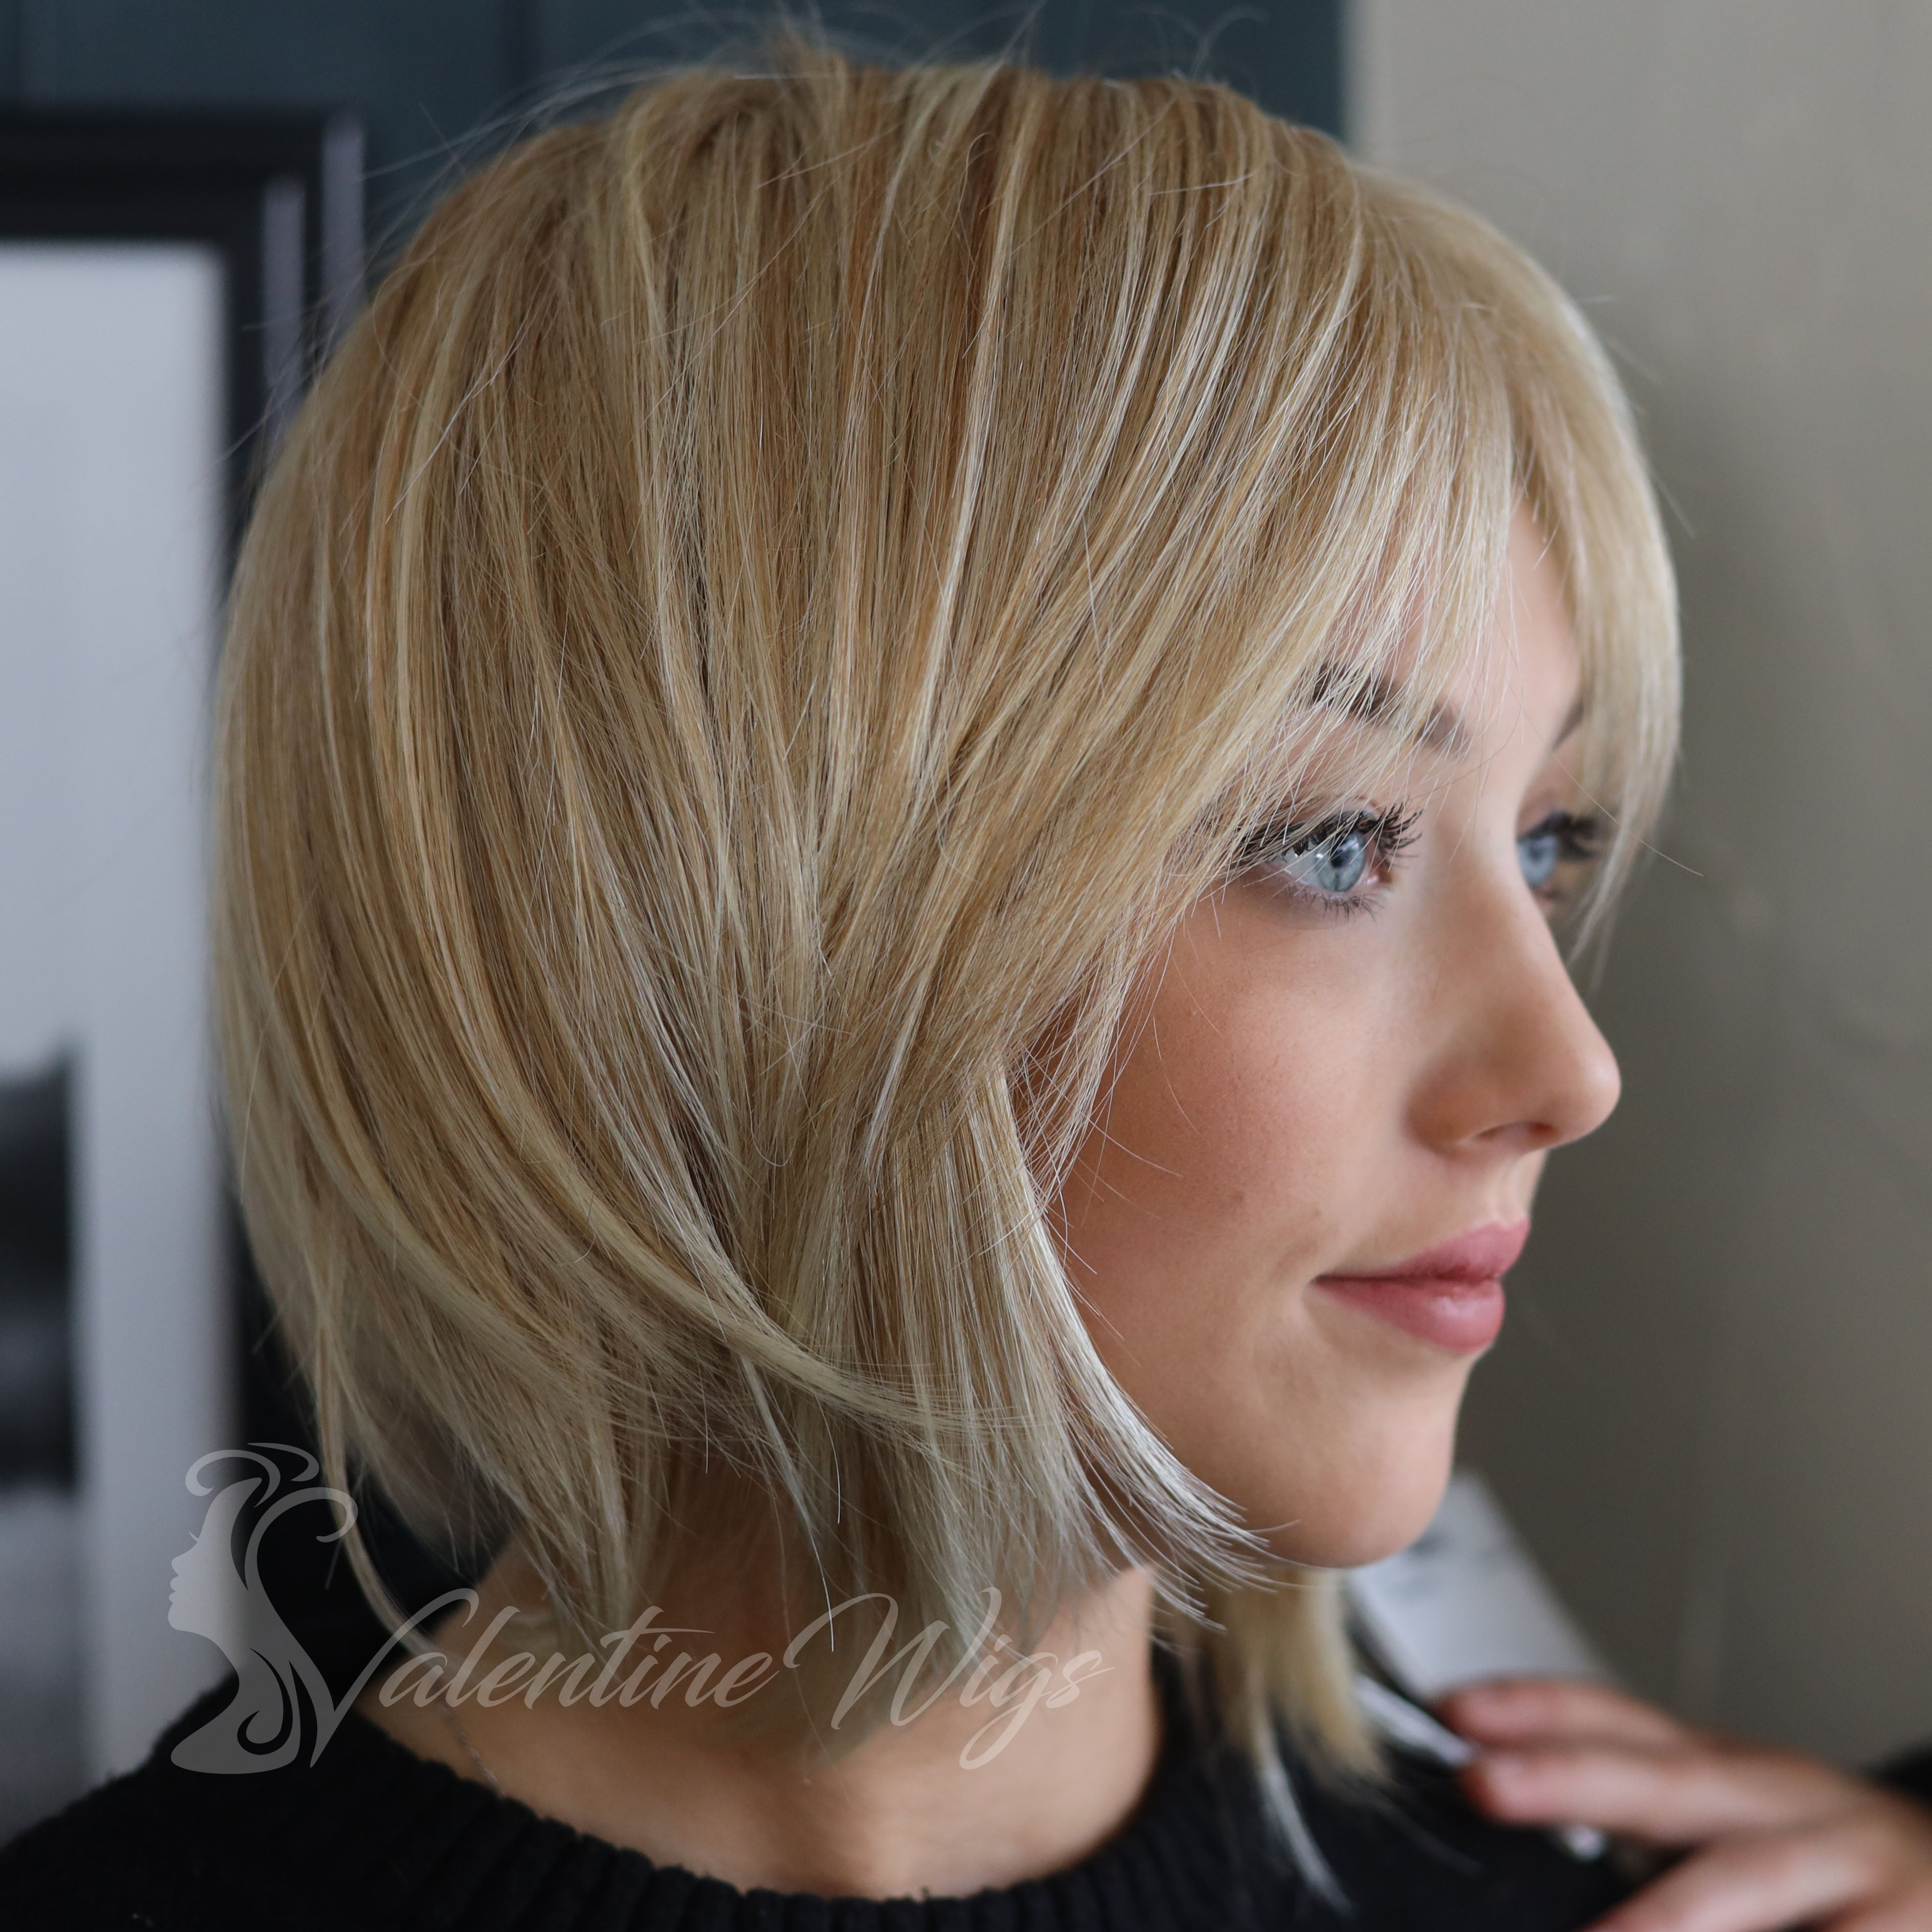 What is it about a blonde bob that we love so much?